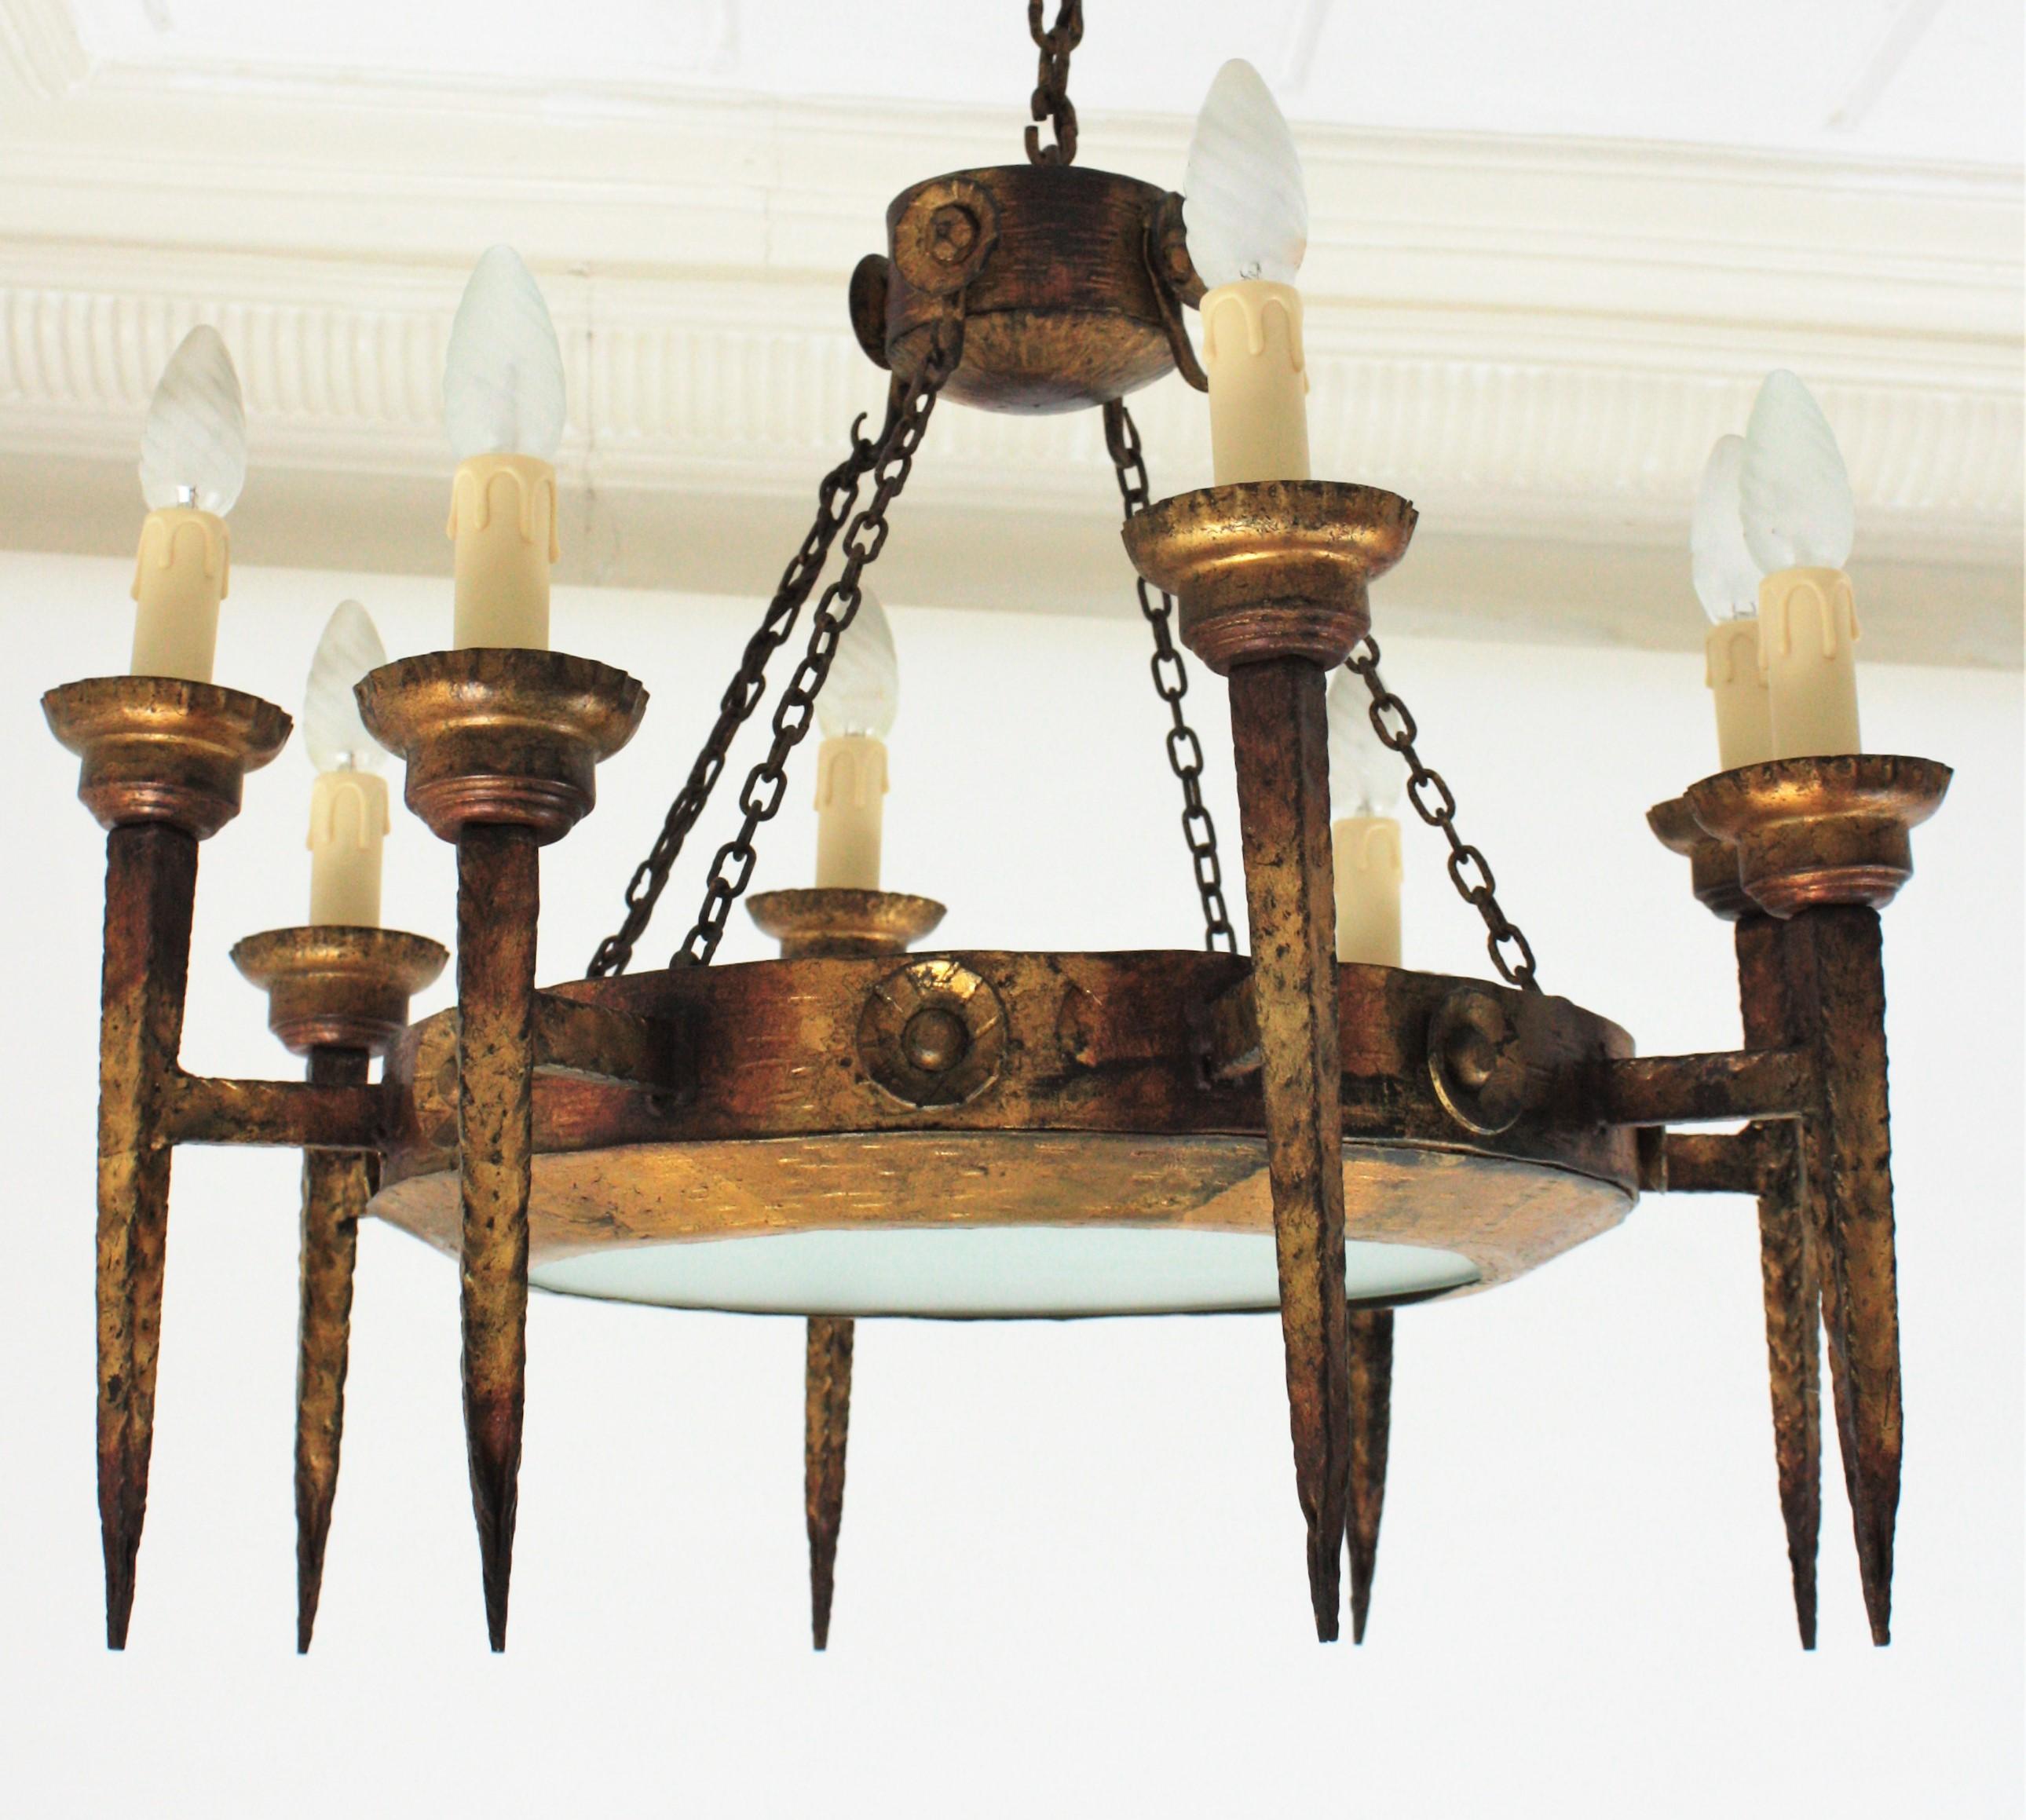 Spanish Gothic Revival Ring Torch Chandelier, Gilt Wrought Iron In Good Condition For Sale In Barcelona, ES